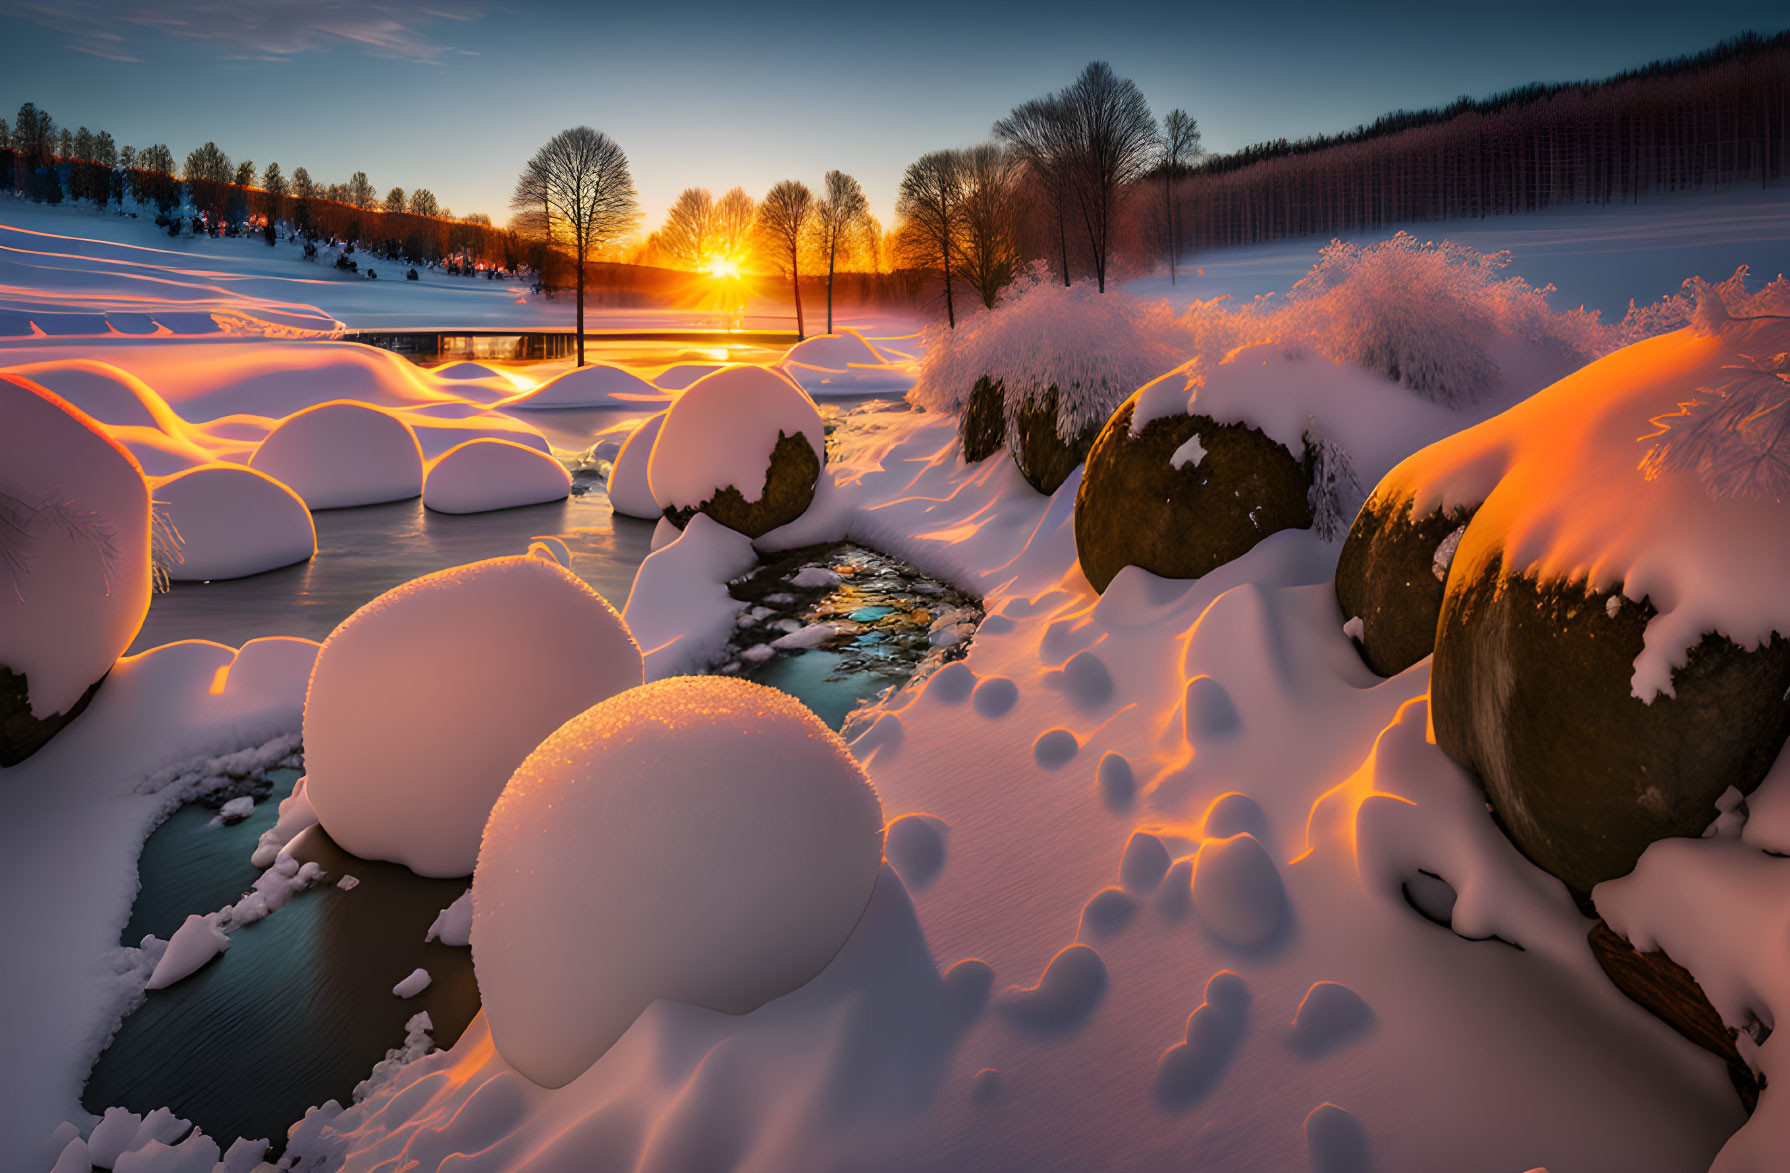 Golden winter sunset over snowy landscape with stream and bare trees